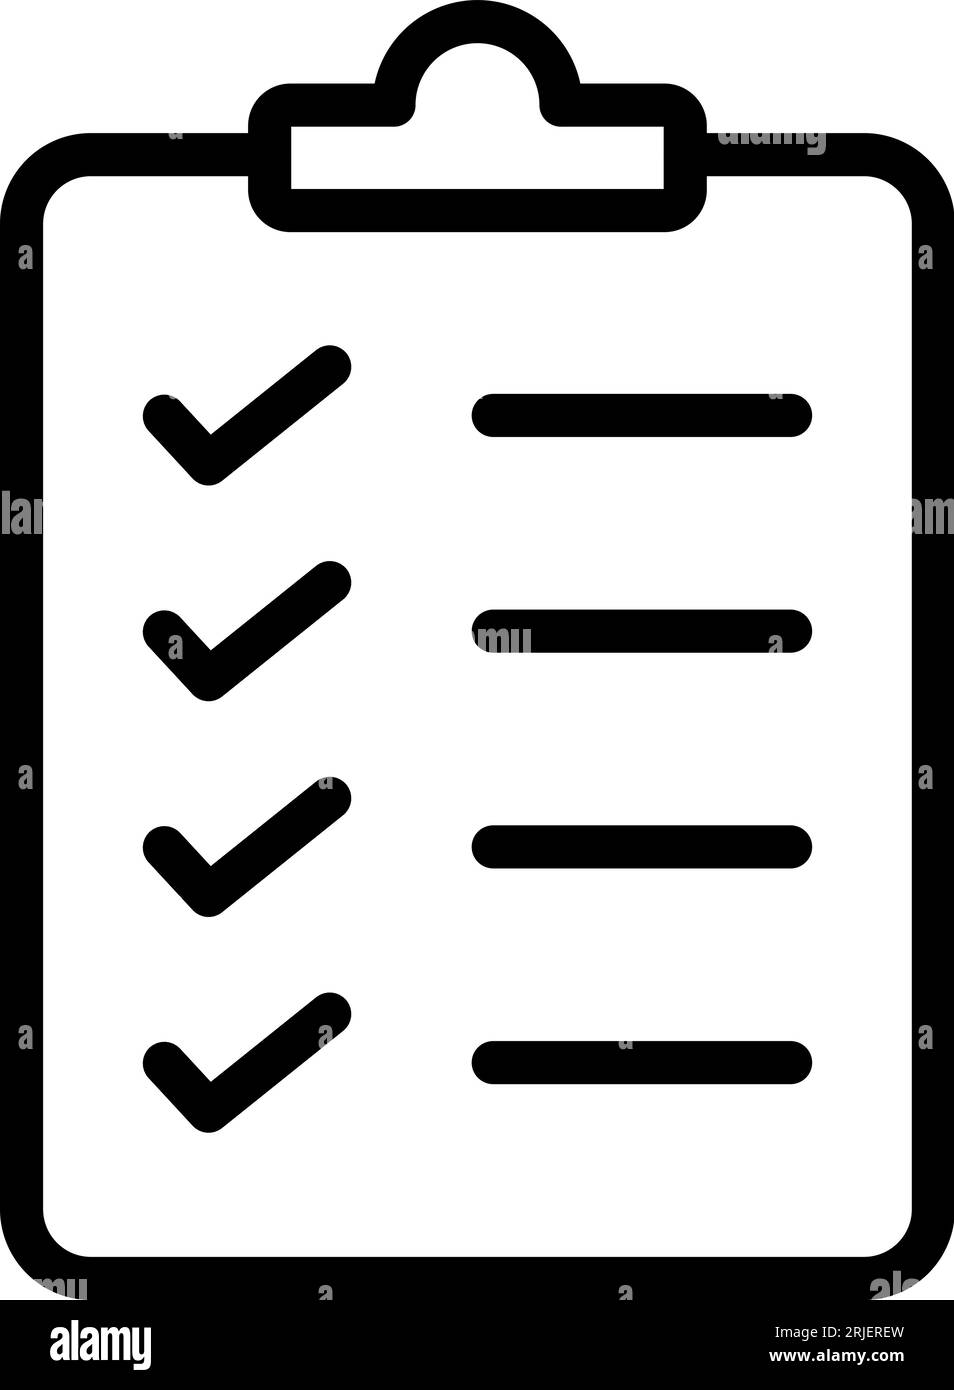 Check list line icon as document or contract concept symbol Stock Vector